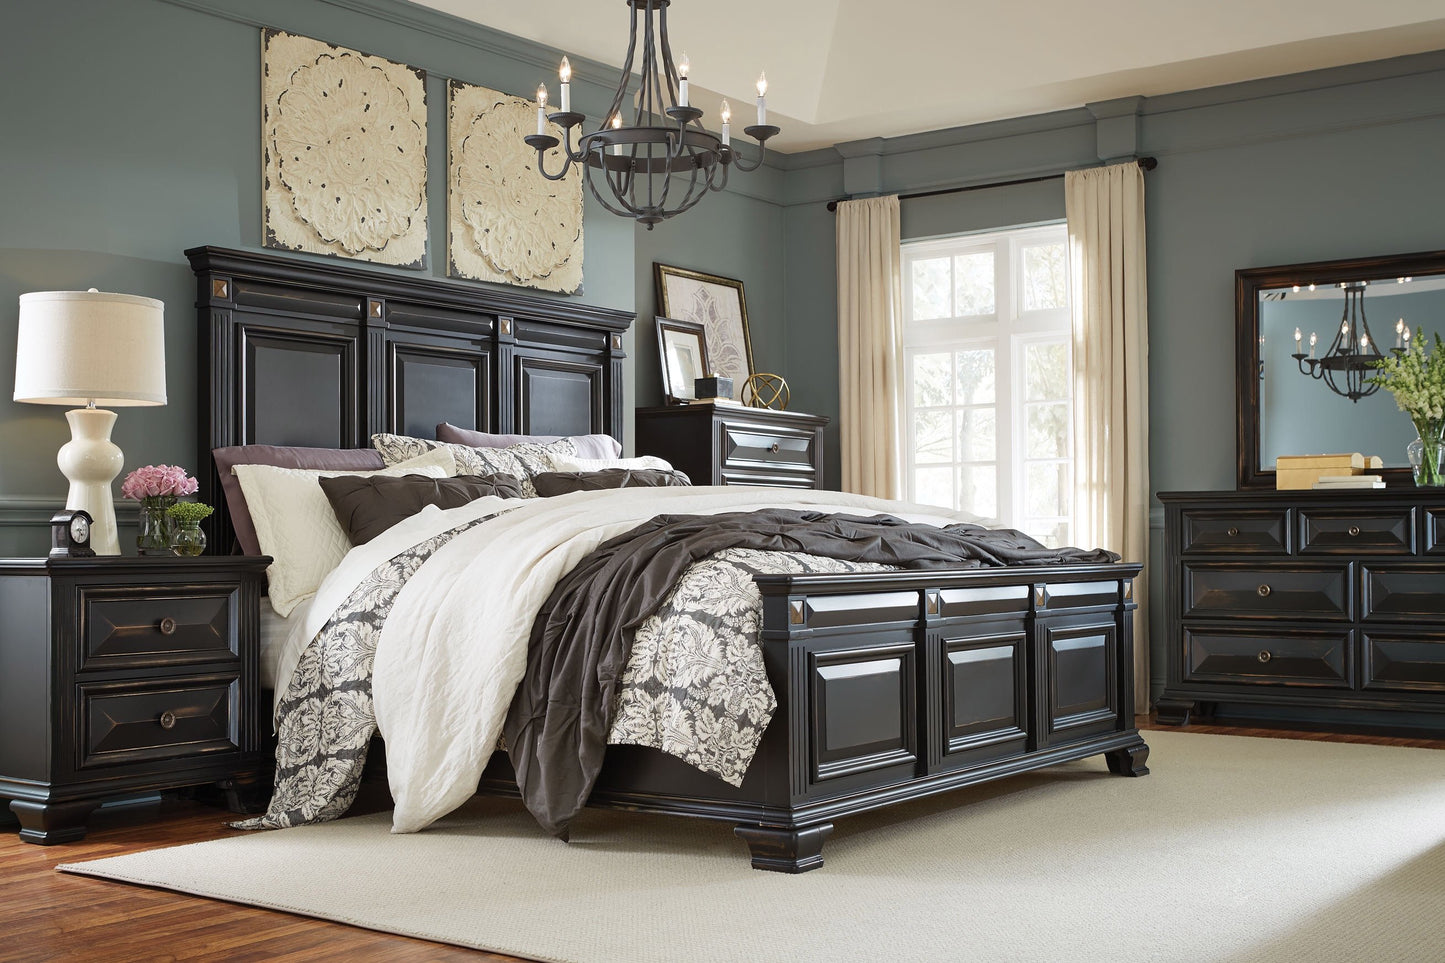 WEEKLY or MONTHLY. Passages Bedroom Set